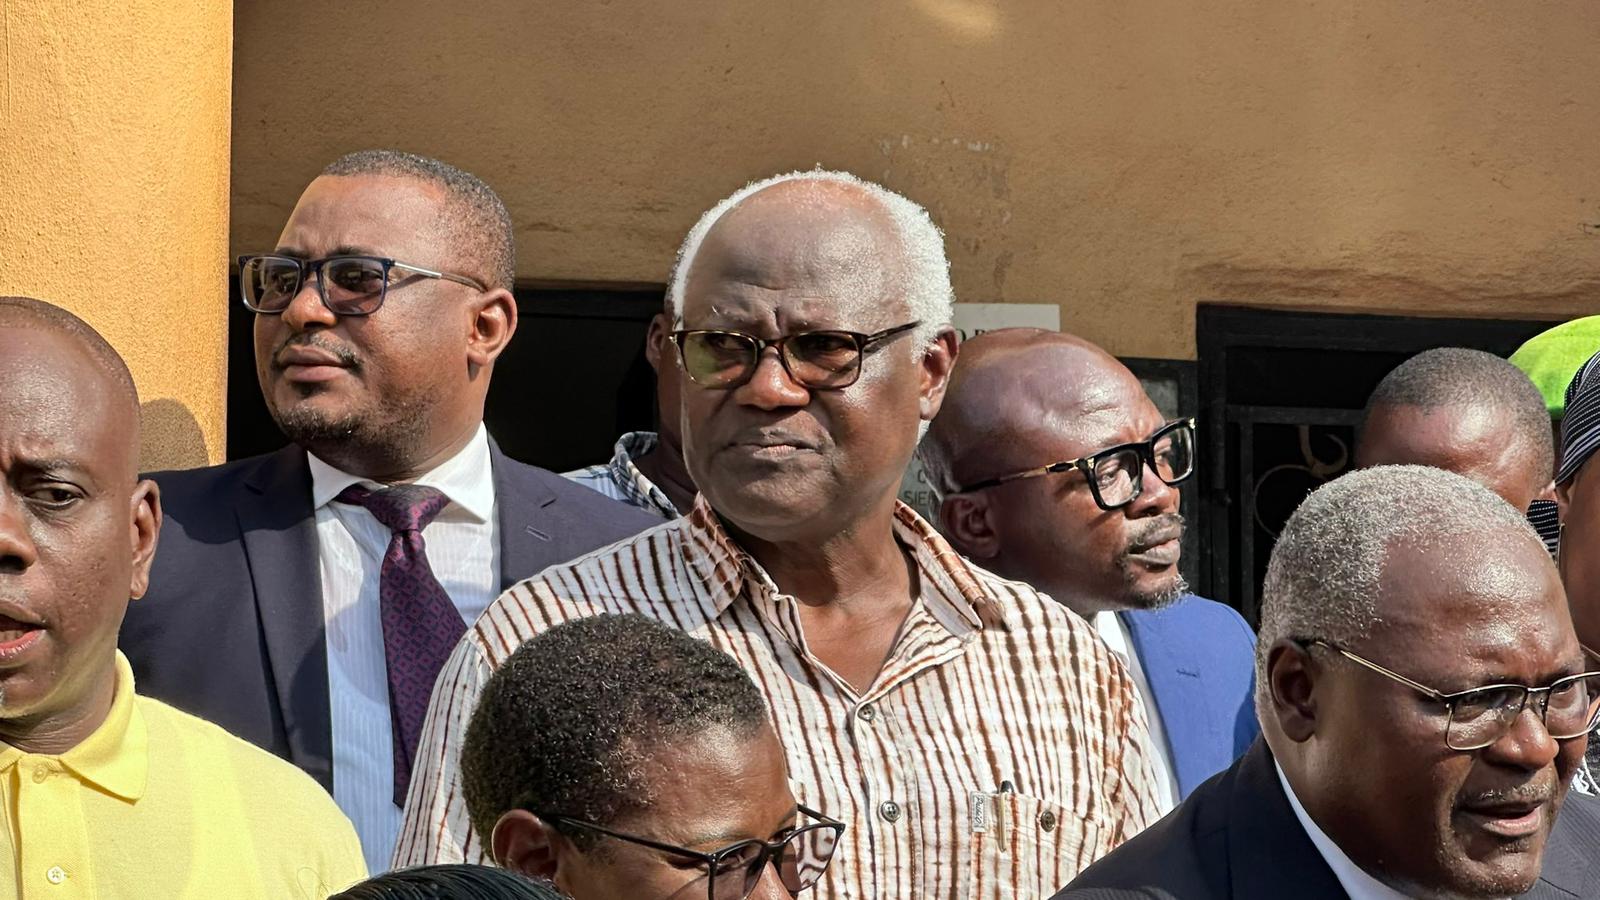 As Former President Ernest Bai Koroma Faces Treason Charges, Is Democracy on Trial in Sierra Leone?